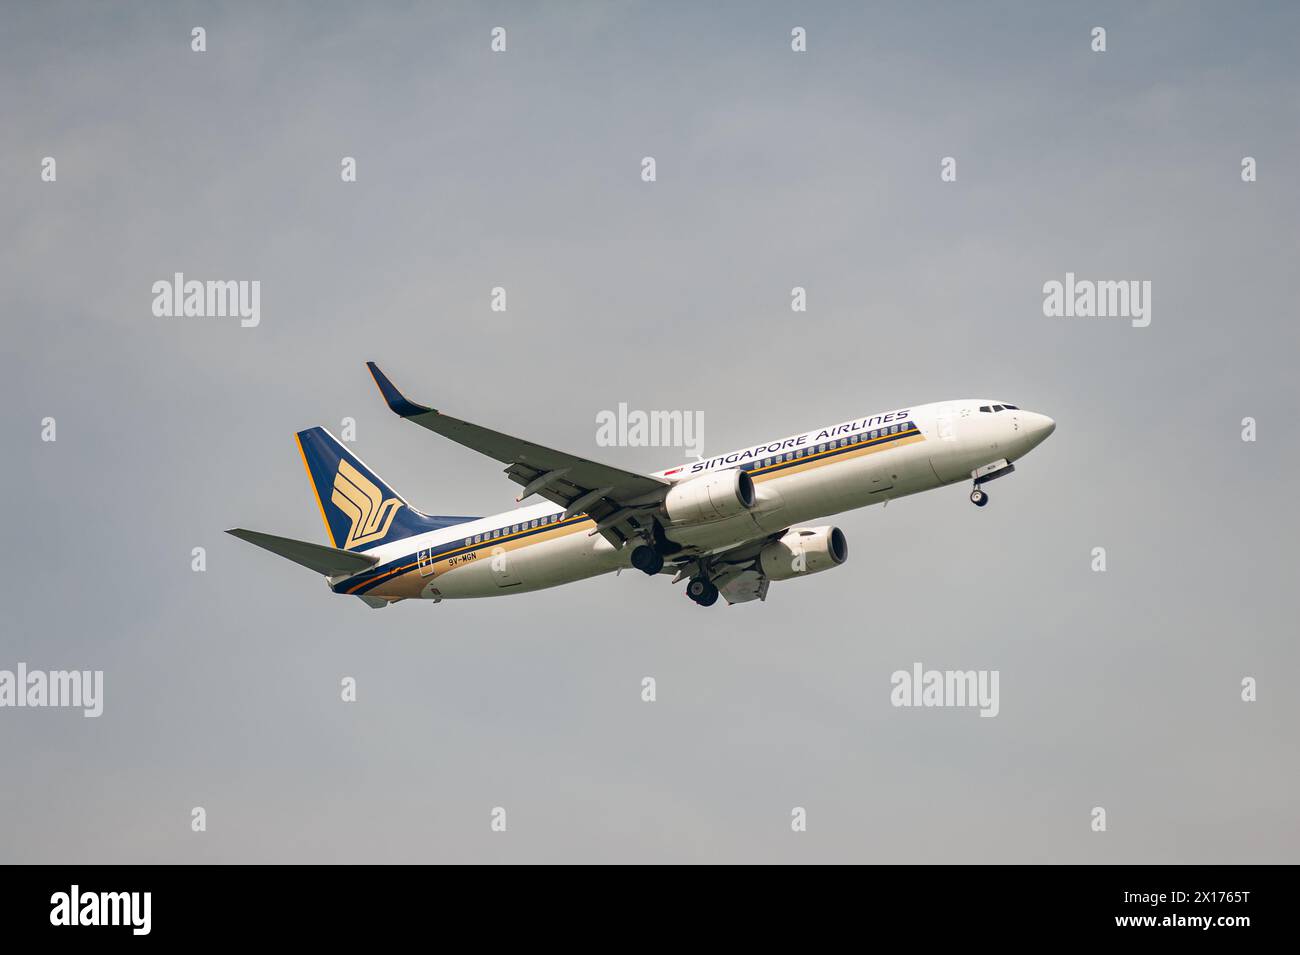 15.07.2023, Singapore, Republic of Singapore, Asia - A Singapore Airlines (SIA) Boeing 737-800 passenger jet approaches Changi Airport for landing. Stock Photo